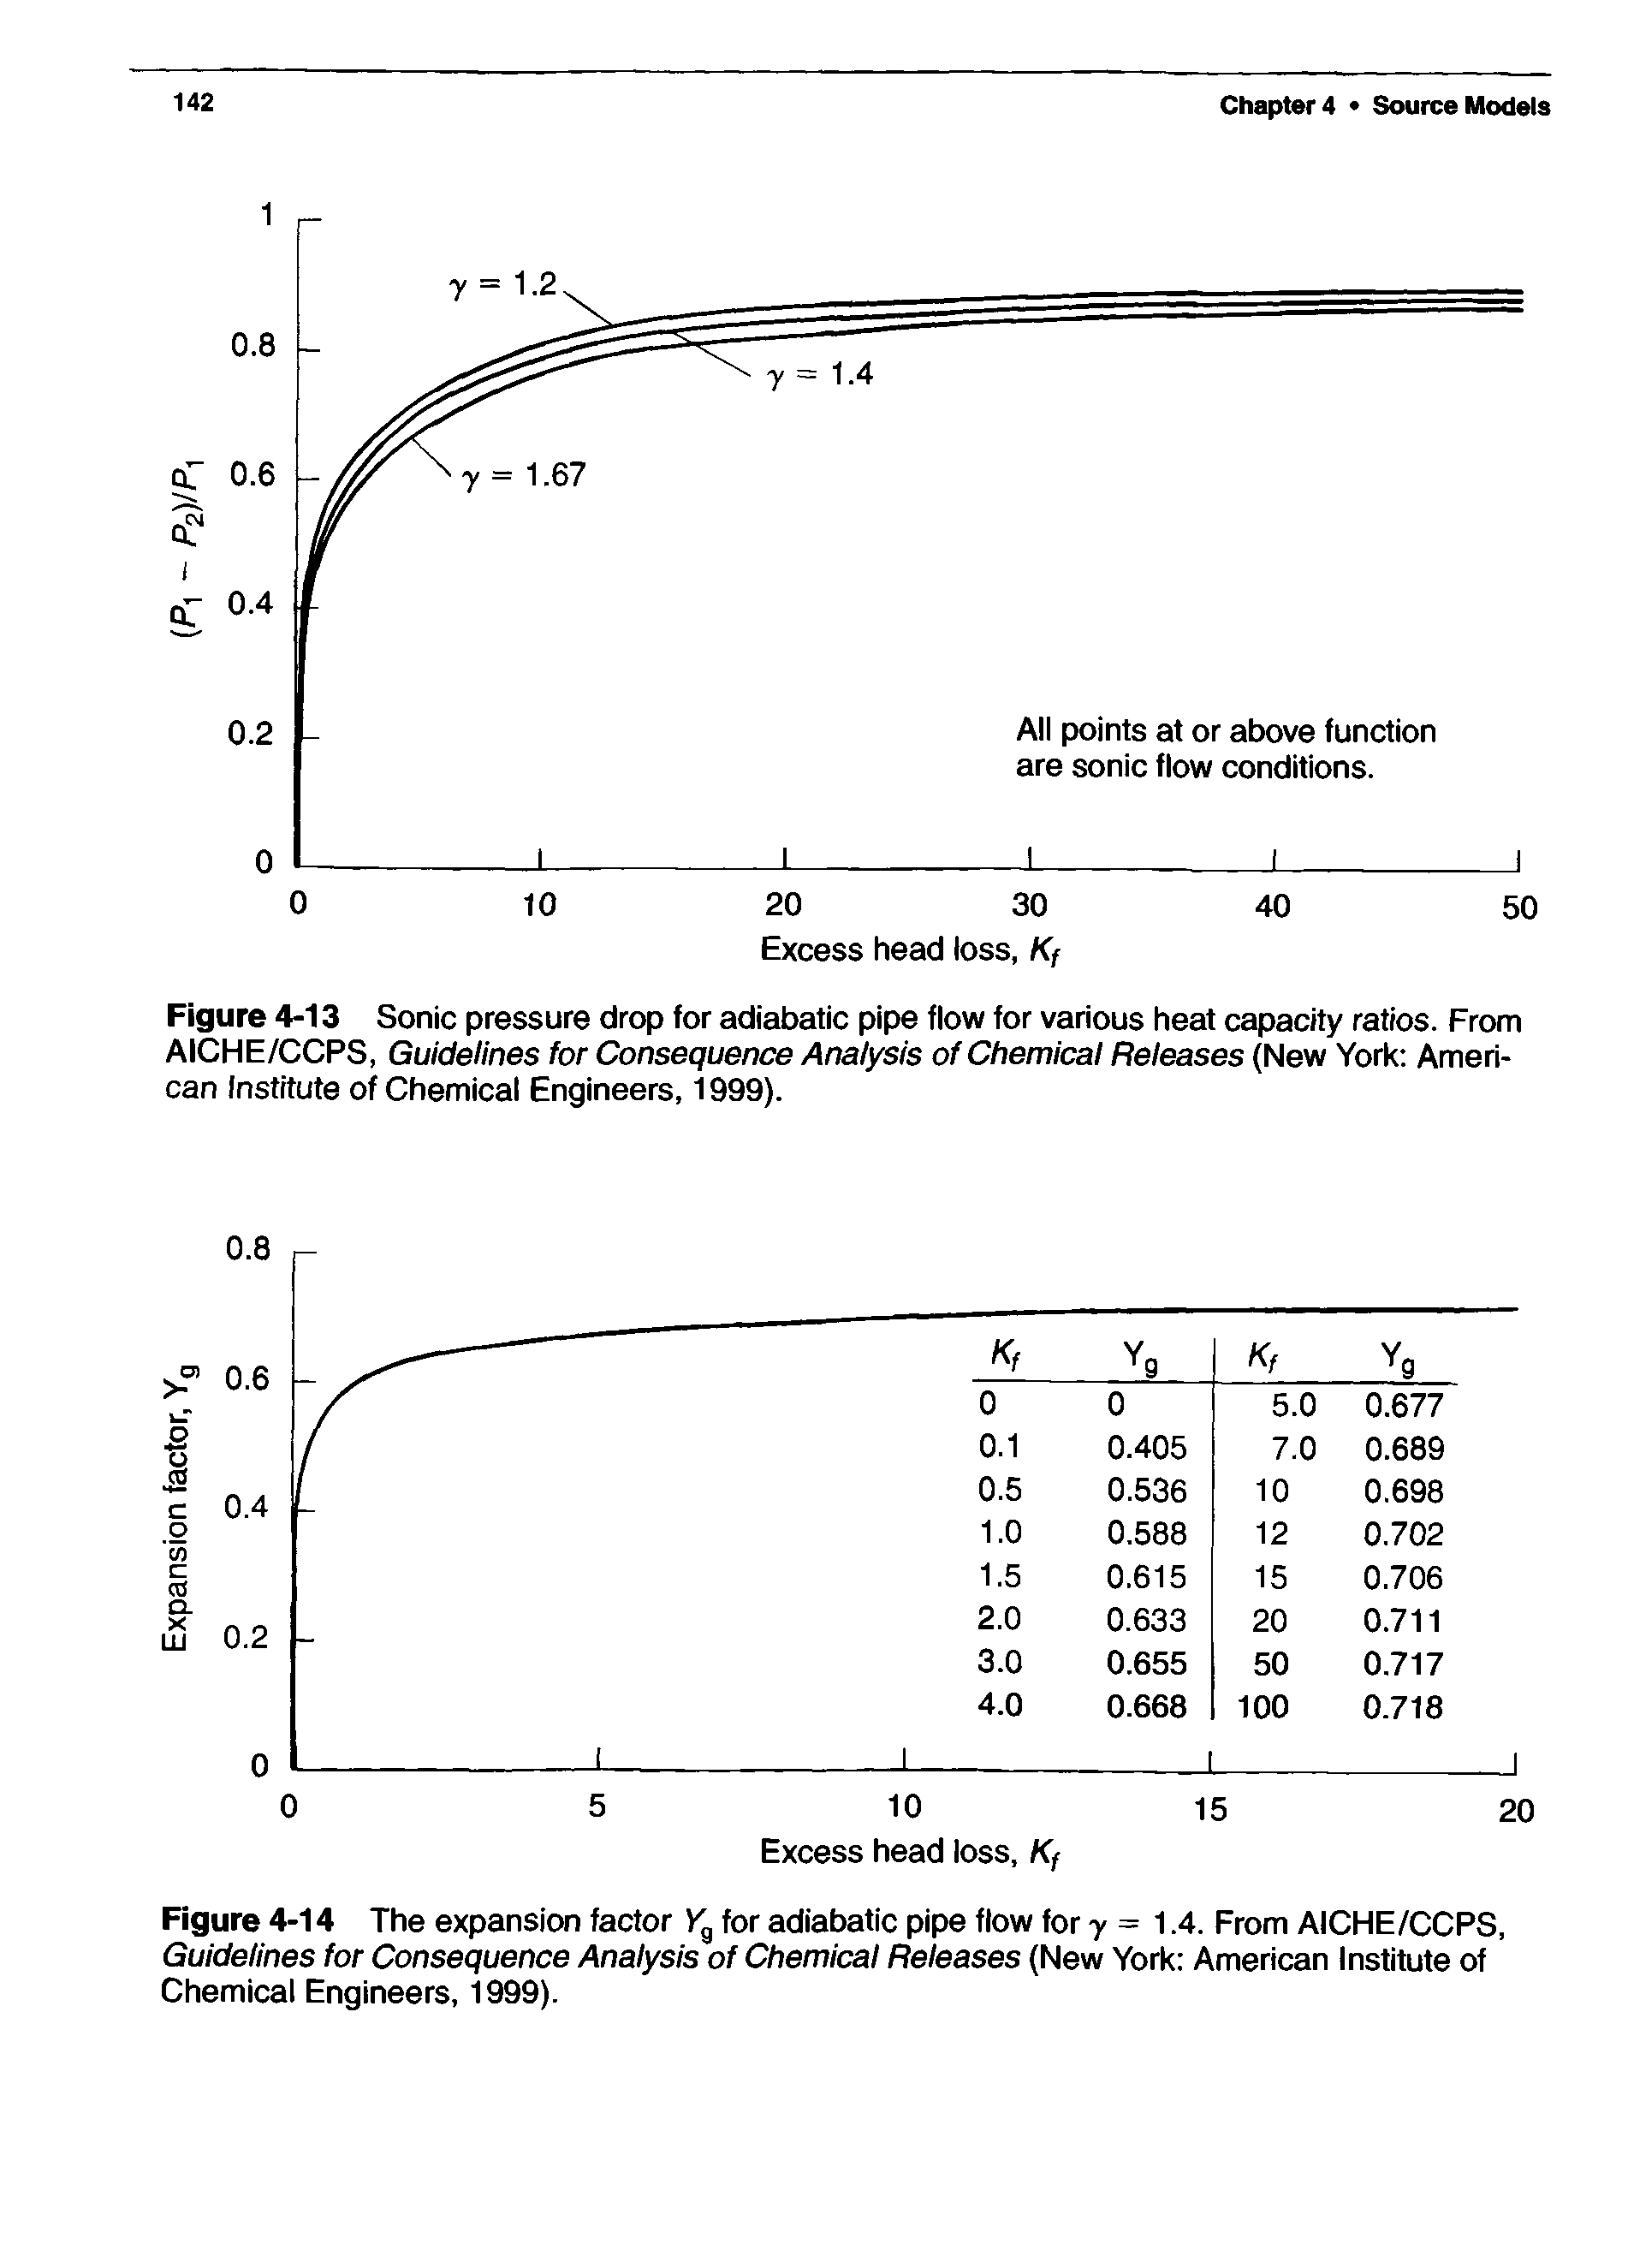 Figure 4-13 Sonic pressure drop for adiabatic pipe flow for various heat capacity ratios. From AICHE/CCPS, Guidelines for Consequence Analysis of Chemical Releases (New York American Institute of Chemical Engineers, 1999).